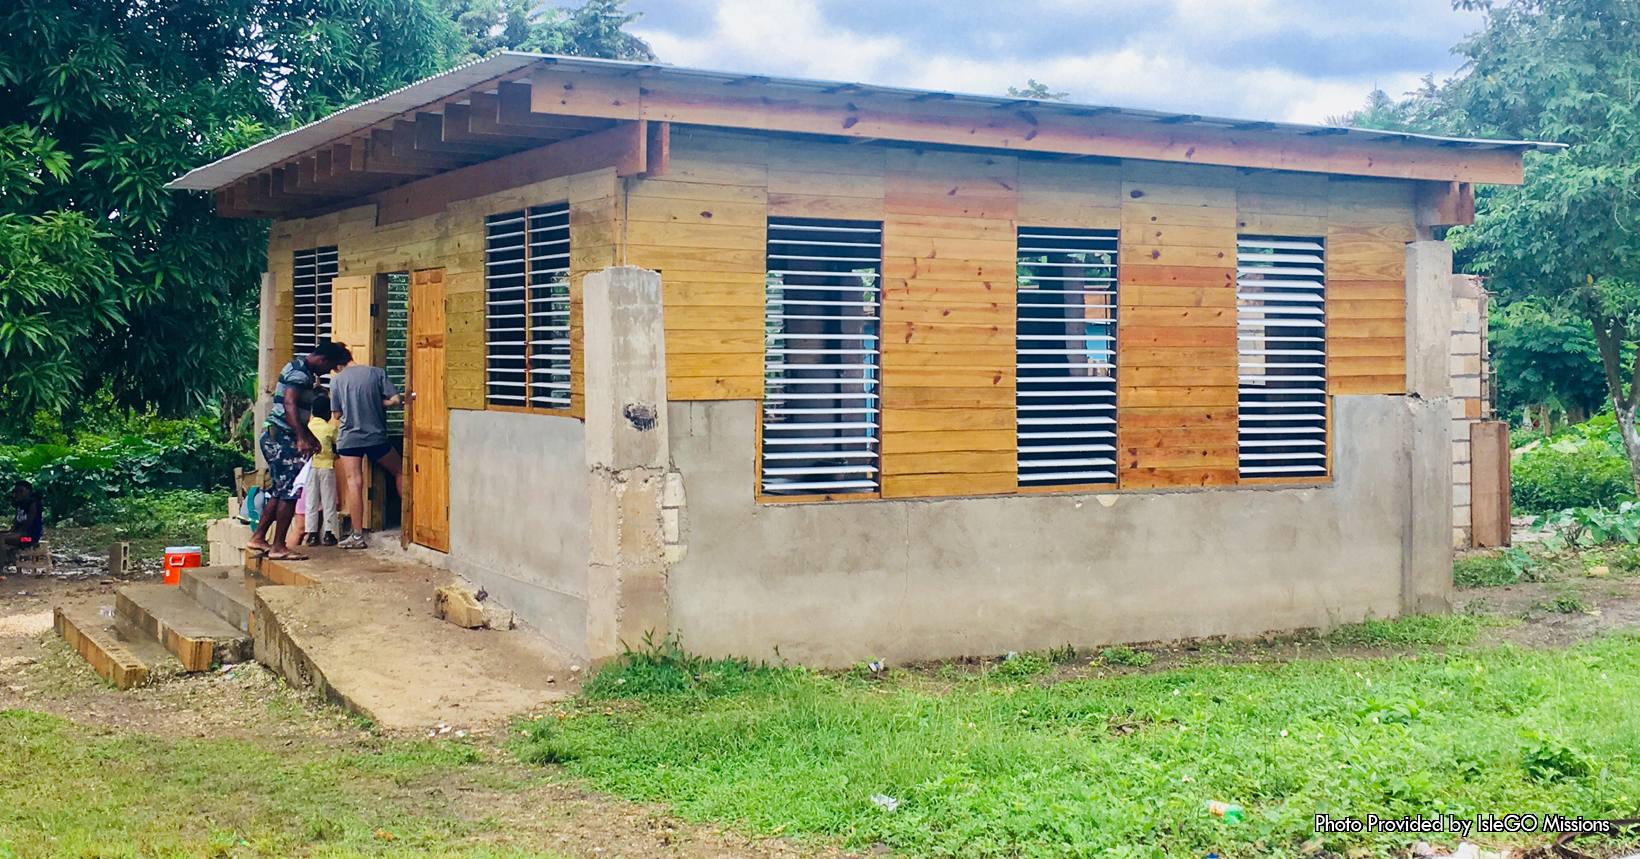 In Jamaica there are many places that are underdeveloped and need much assistance from outside sources. This picture which was taken in Jamaica by IsleGo Missions, illustrates one of the many things that are being developed to help those in need. This picture captures the first Hope Center in Jamaica. The center has four flights of stair that start from the ground up to the front doors. The front doors as well as most of the center is made up of wood. The wood surrounds the Hope Center starting from its half-way point all the way to the top. Furthermore, the wood was placed horizontally around the house. Although the middle and upper-half of the Hope Center is made out of wood, the bottom half is made out of cement. Not only is the bottom half made out of cement, the pillars on the four corners of the Hope Center are also made out of cement. Not to mention, the Hope Center has multiple windows embedded in it. There are two in the front entrance as well as a several around the building. This Hope Center was built in a squatter community known as “the Compound”. The squatter community has around 1500-2500 people in it and they have been forgotten by the Jamaica government as well as the general society. Here in the Compound many suffer from hunger, violence, illiteracy, unemployment, and poverty. In addition, the children in this community suffer from sexual abuse and sometimes the abuse can be from incest. The goal of the center will be to provide jobs for employment, nutrition for the kids, after school programs and last but not least a daycare for parents who are working. In more detail, nutritional meals have already begun to be made for the kids as well as land adjacent from the center being cleared for farming purposes. In the end this Hope Center will be the foundation of hope for the people in this community.